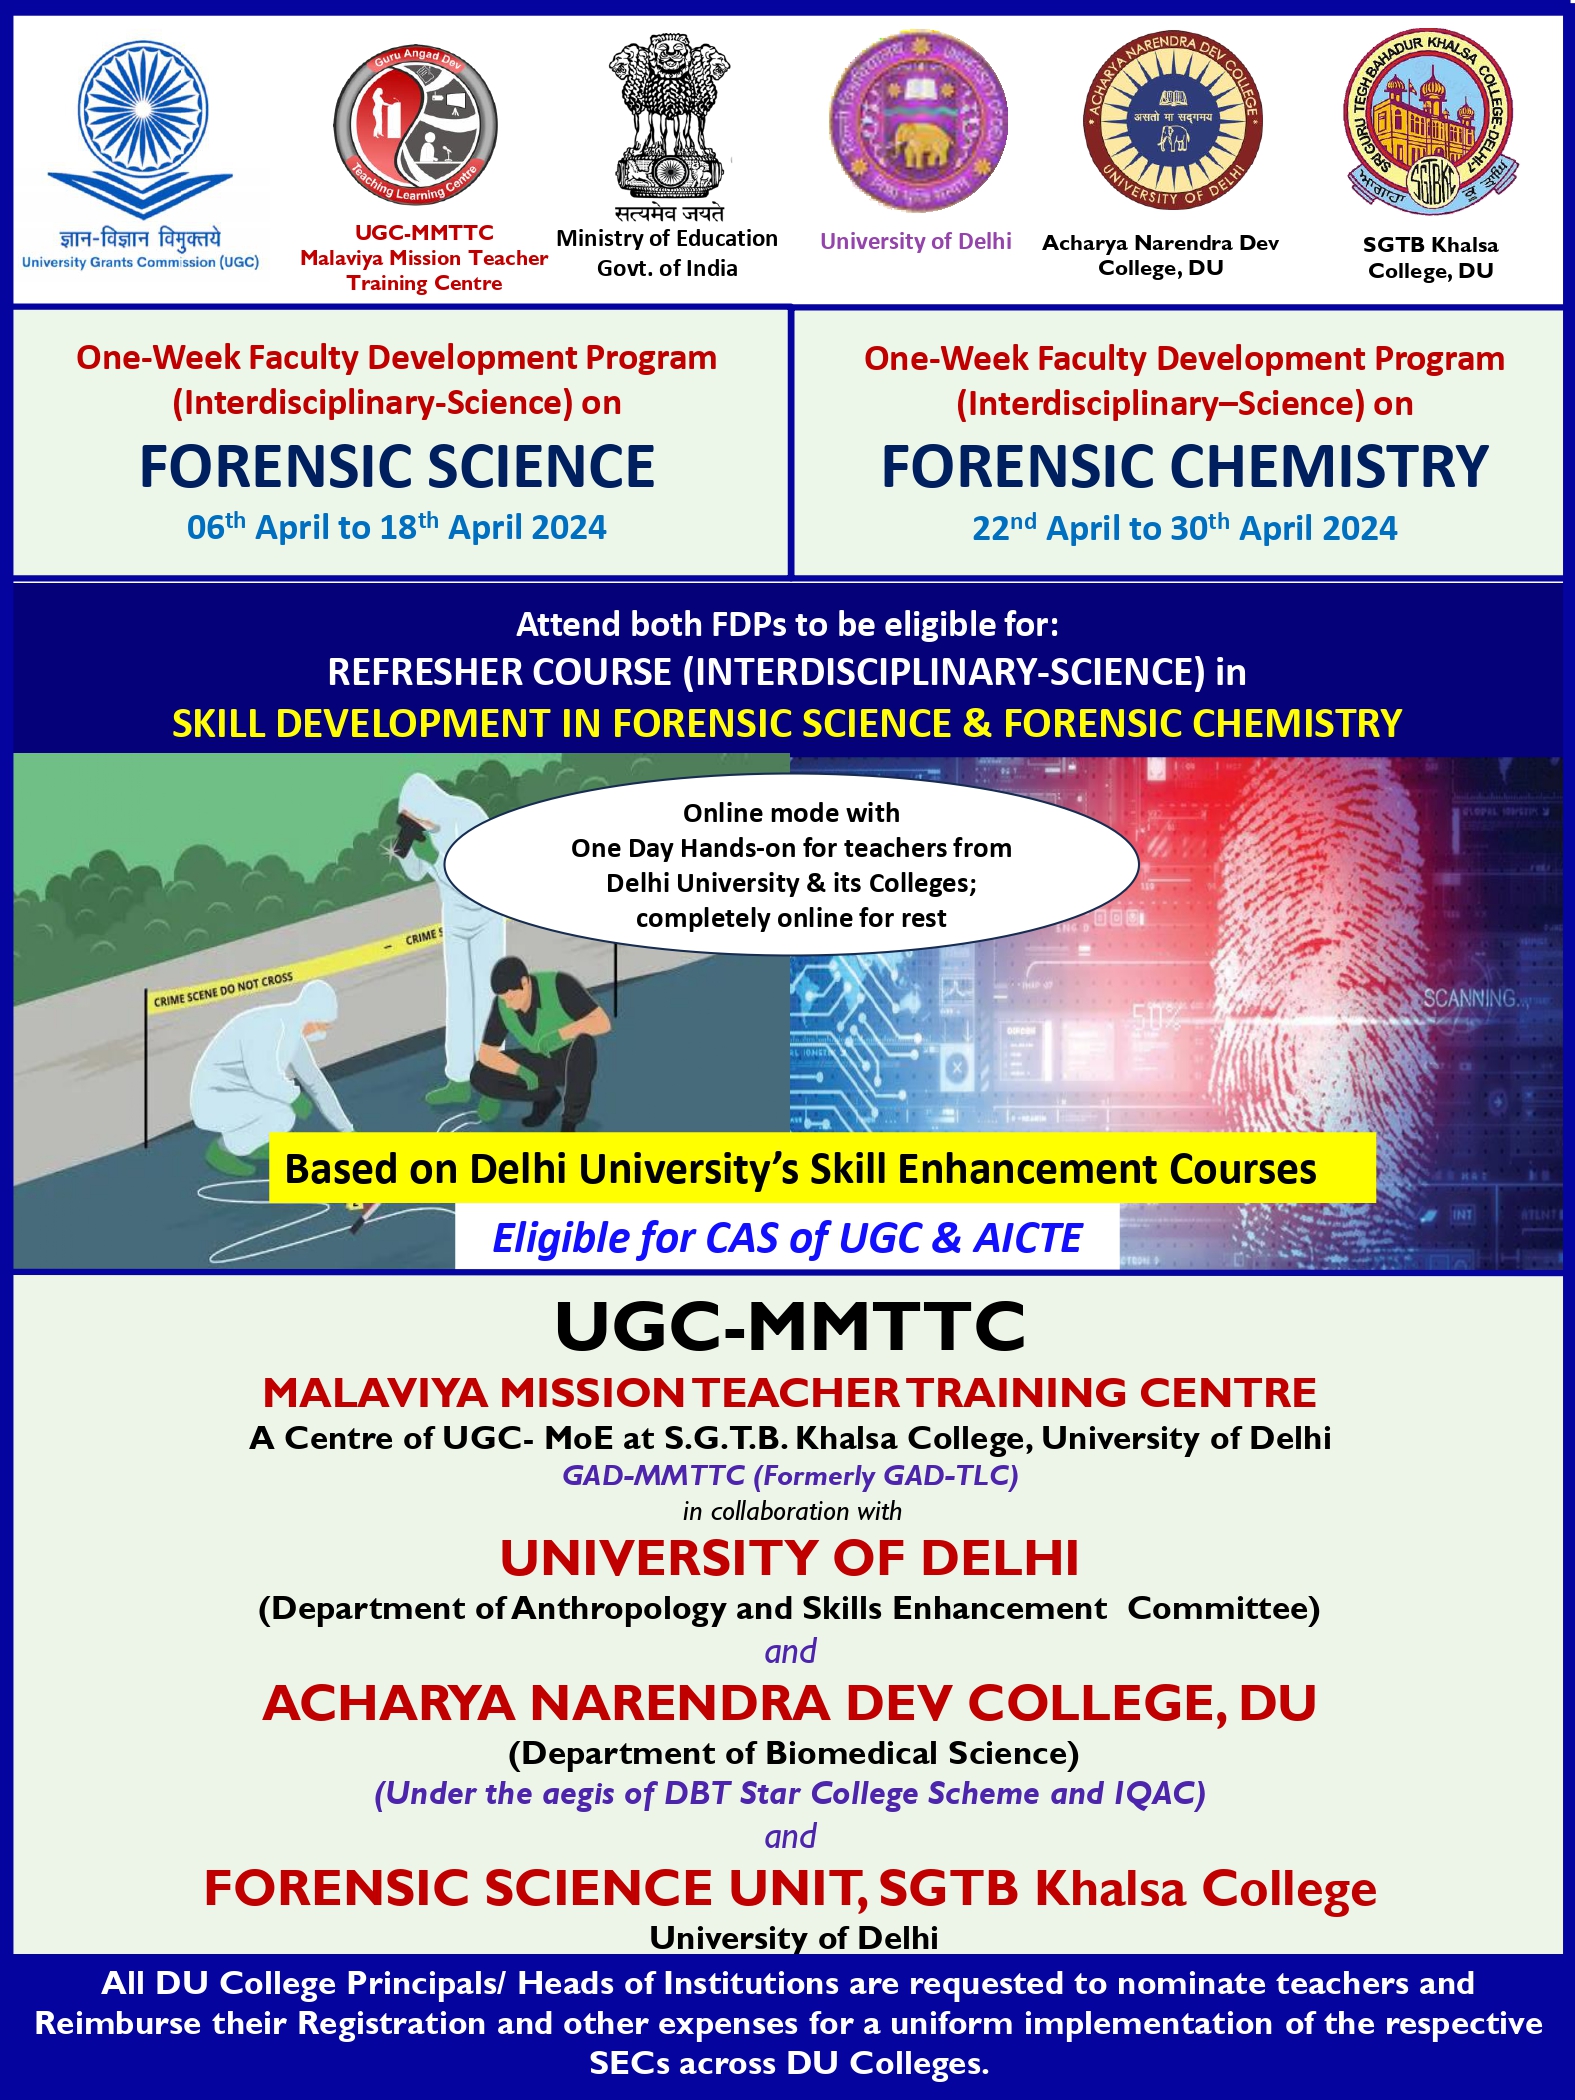 Course Image OFDP- FORENSIC CHEMISTRY (22nd April to 30th April 2024)